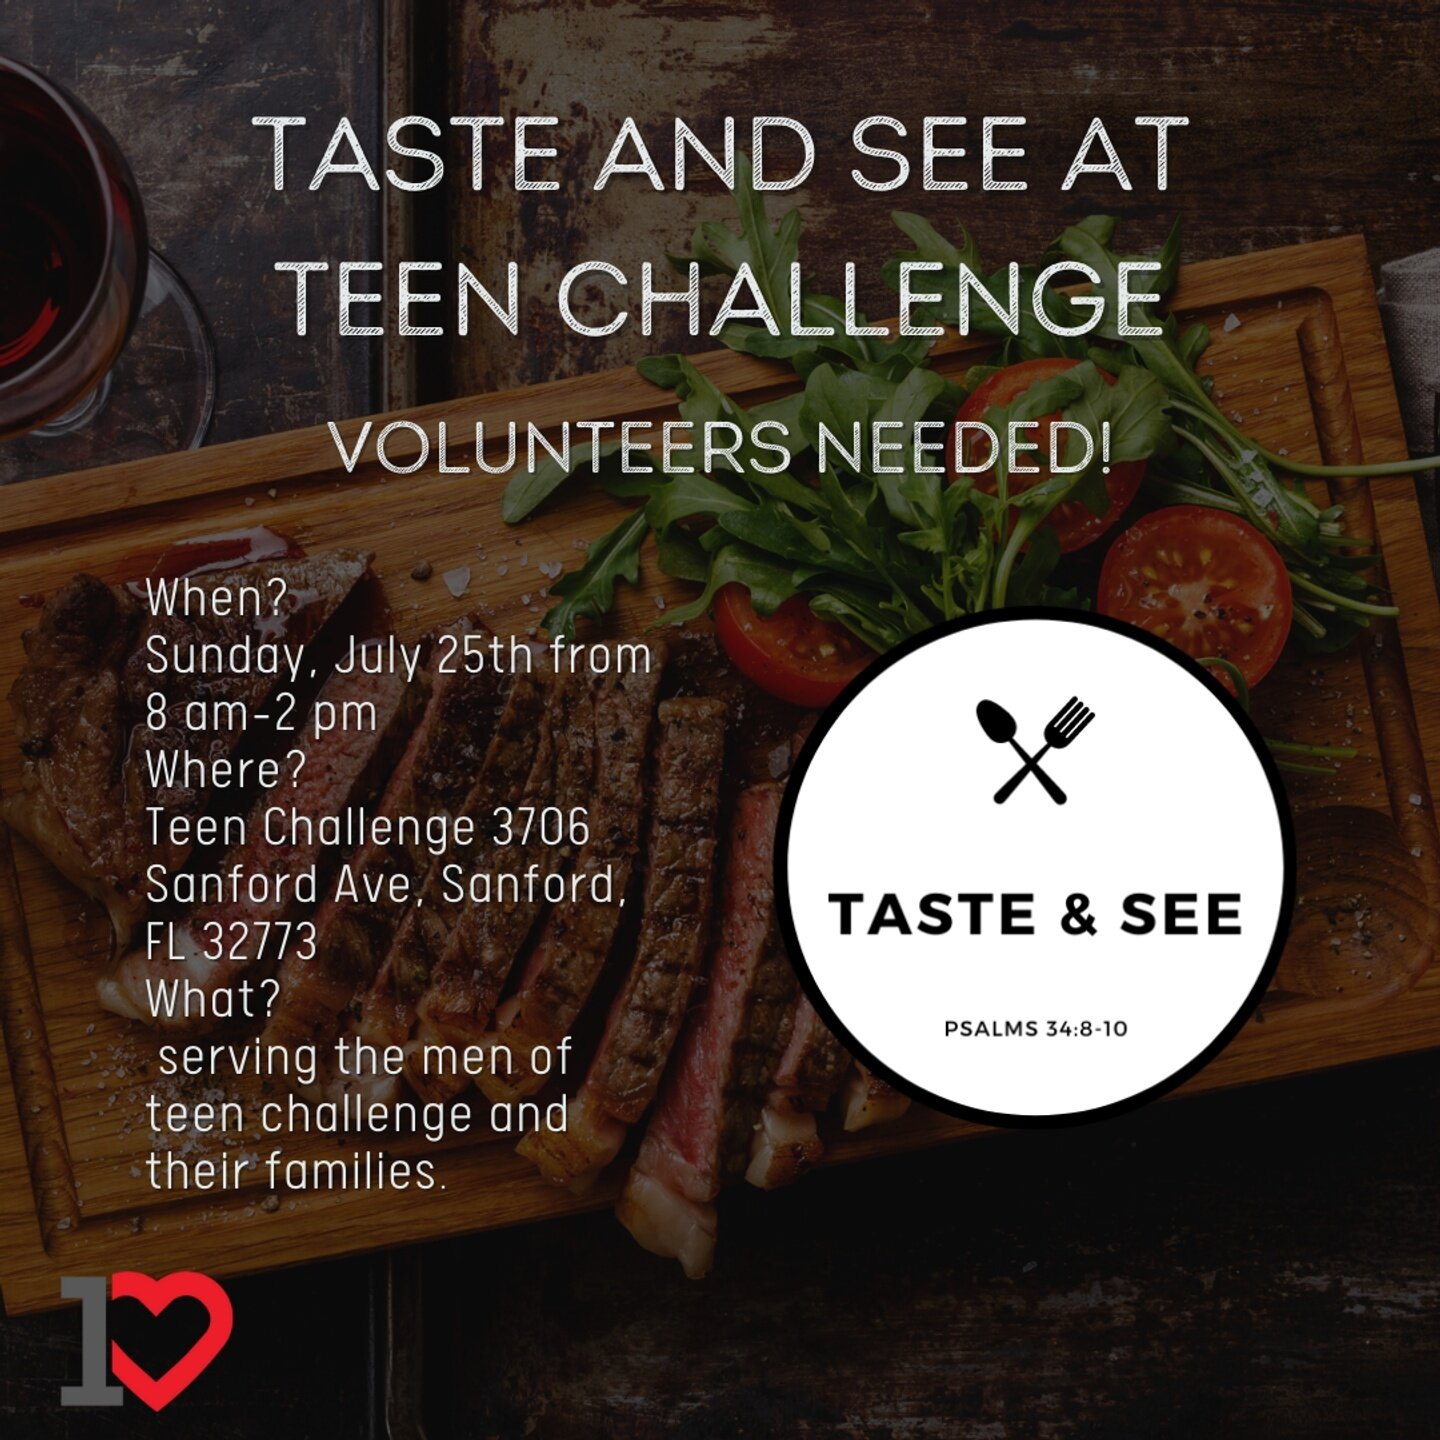 Looking for a volunteer opportunity? Then come join us this Sunday, July 25th from 8 am - 2 pm at Teen Challenge in Sanford. We will be serving the men of Teen Challenge and their families on Family Day with a hot meal right off the smoker. We would 